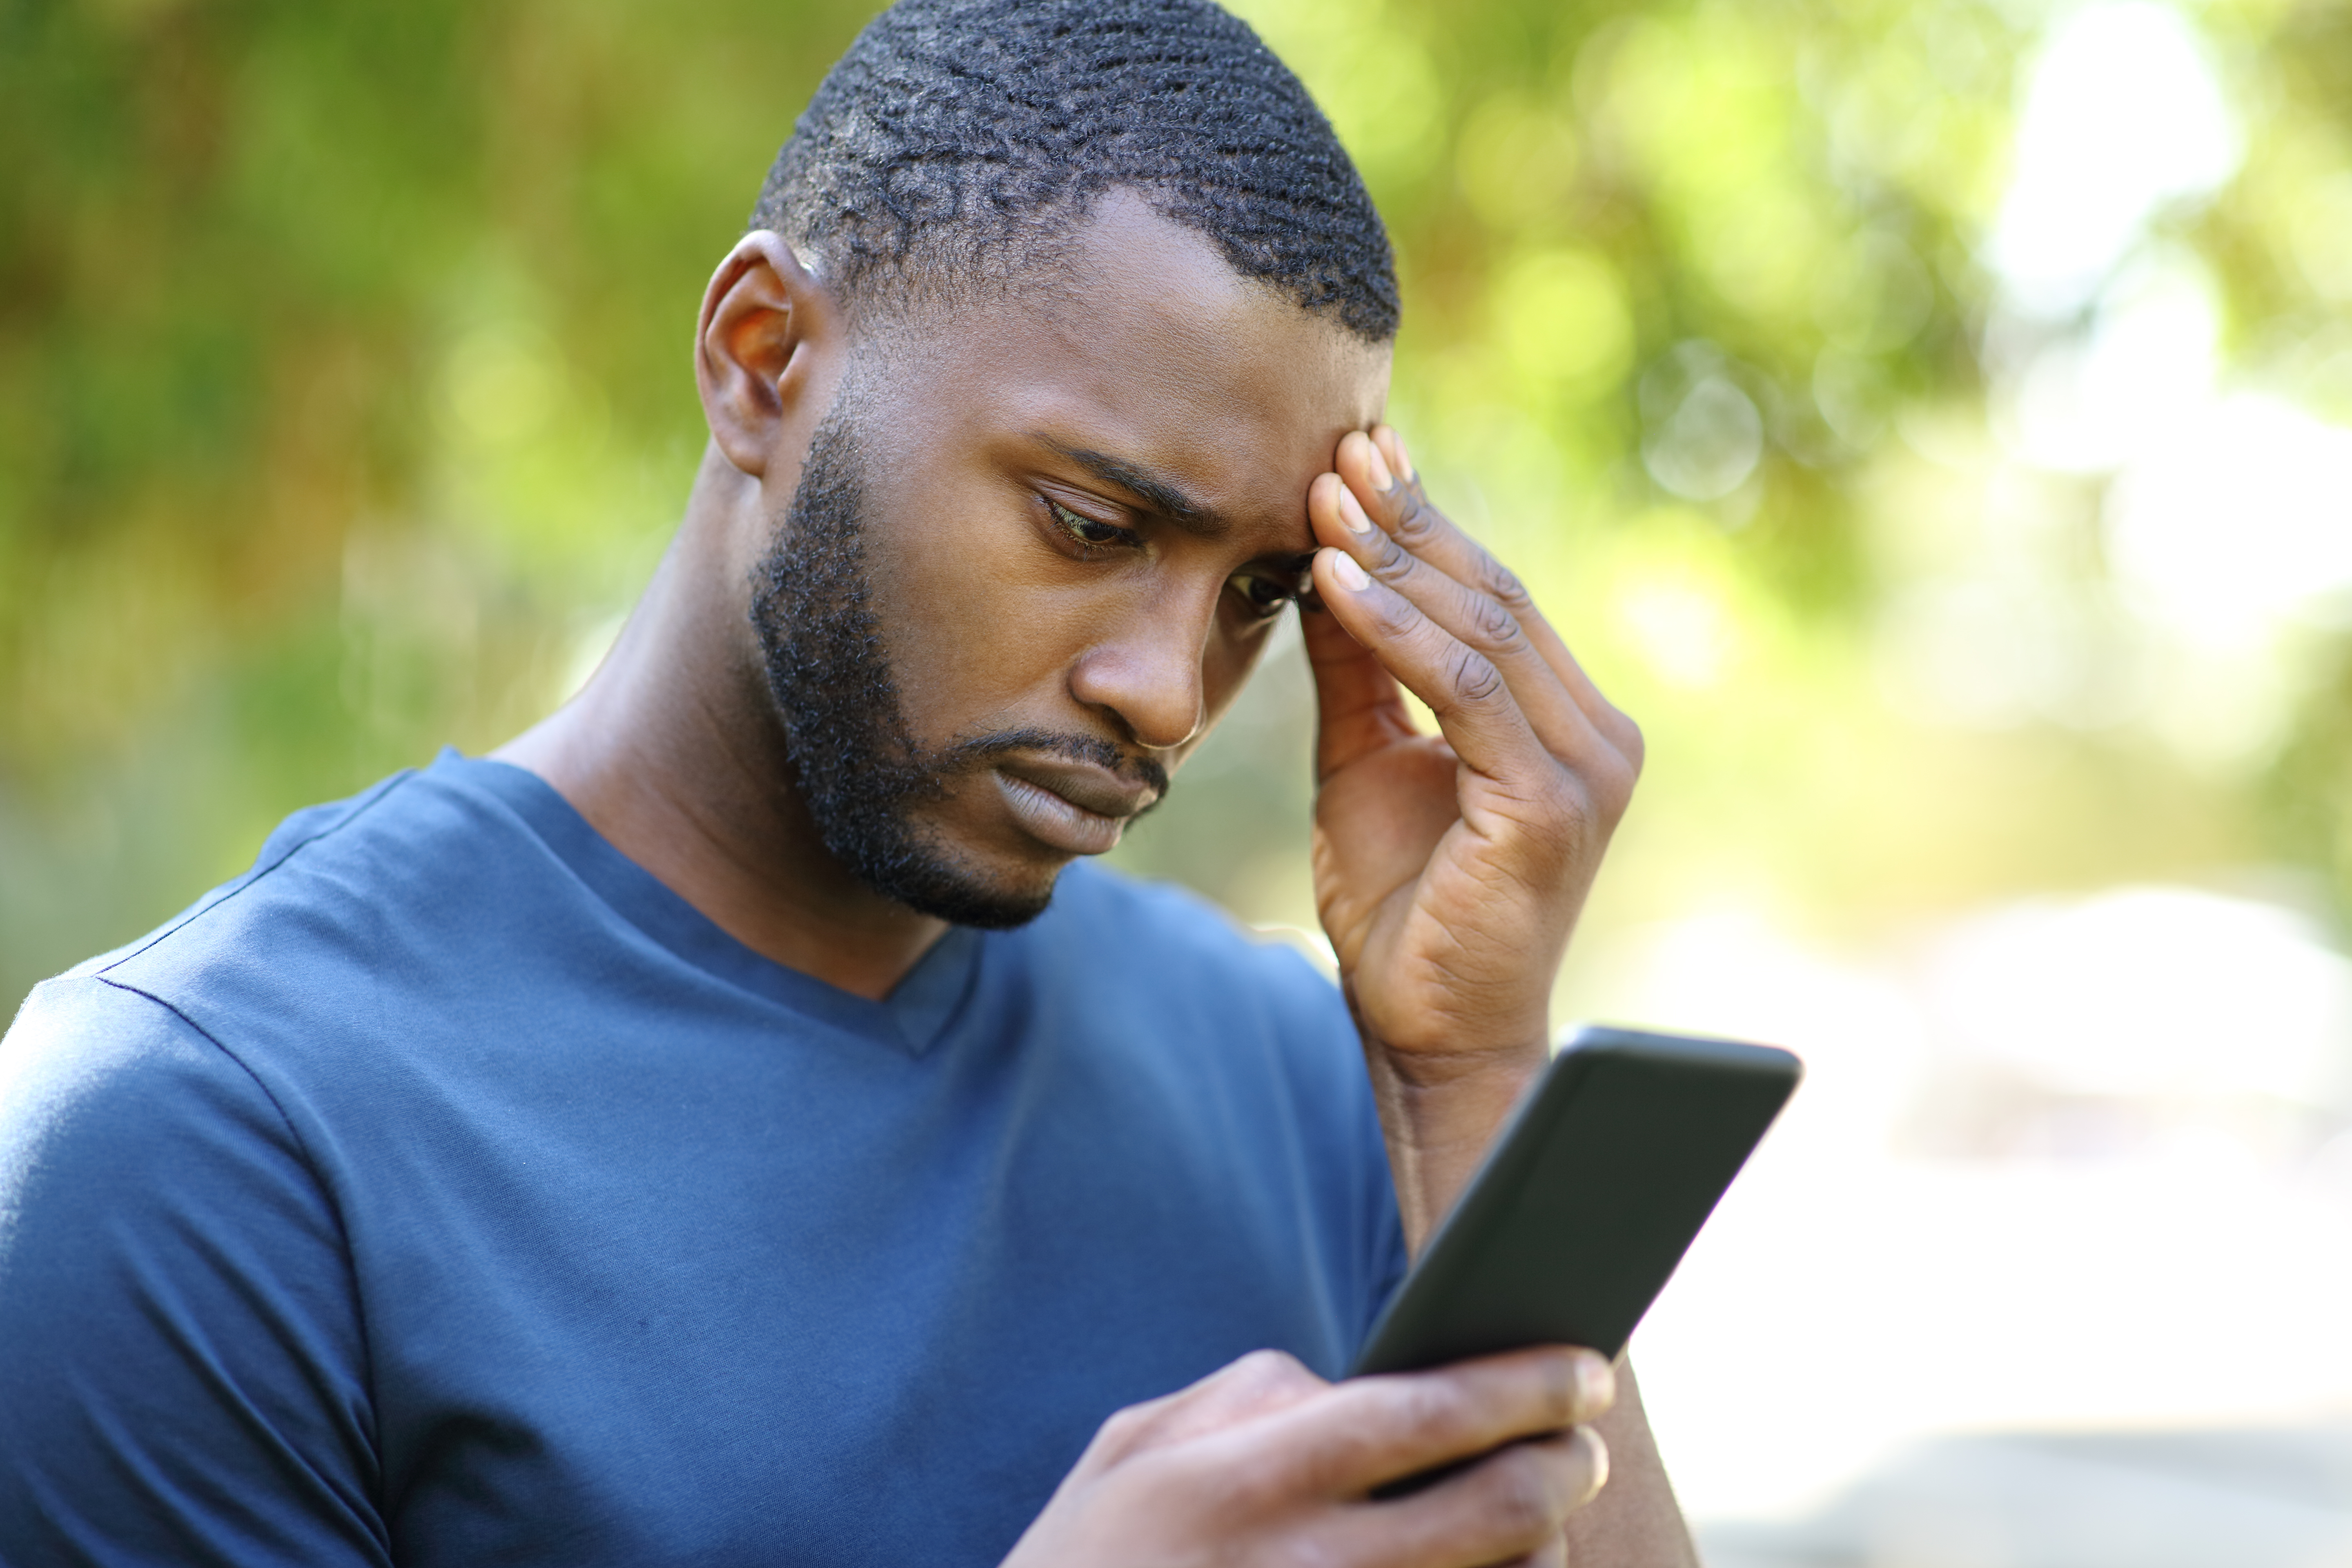 Worried black man checking smart phone in a park | Source: Getty Images